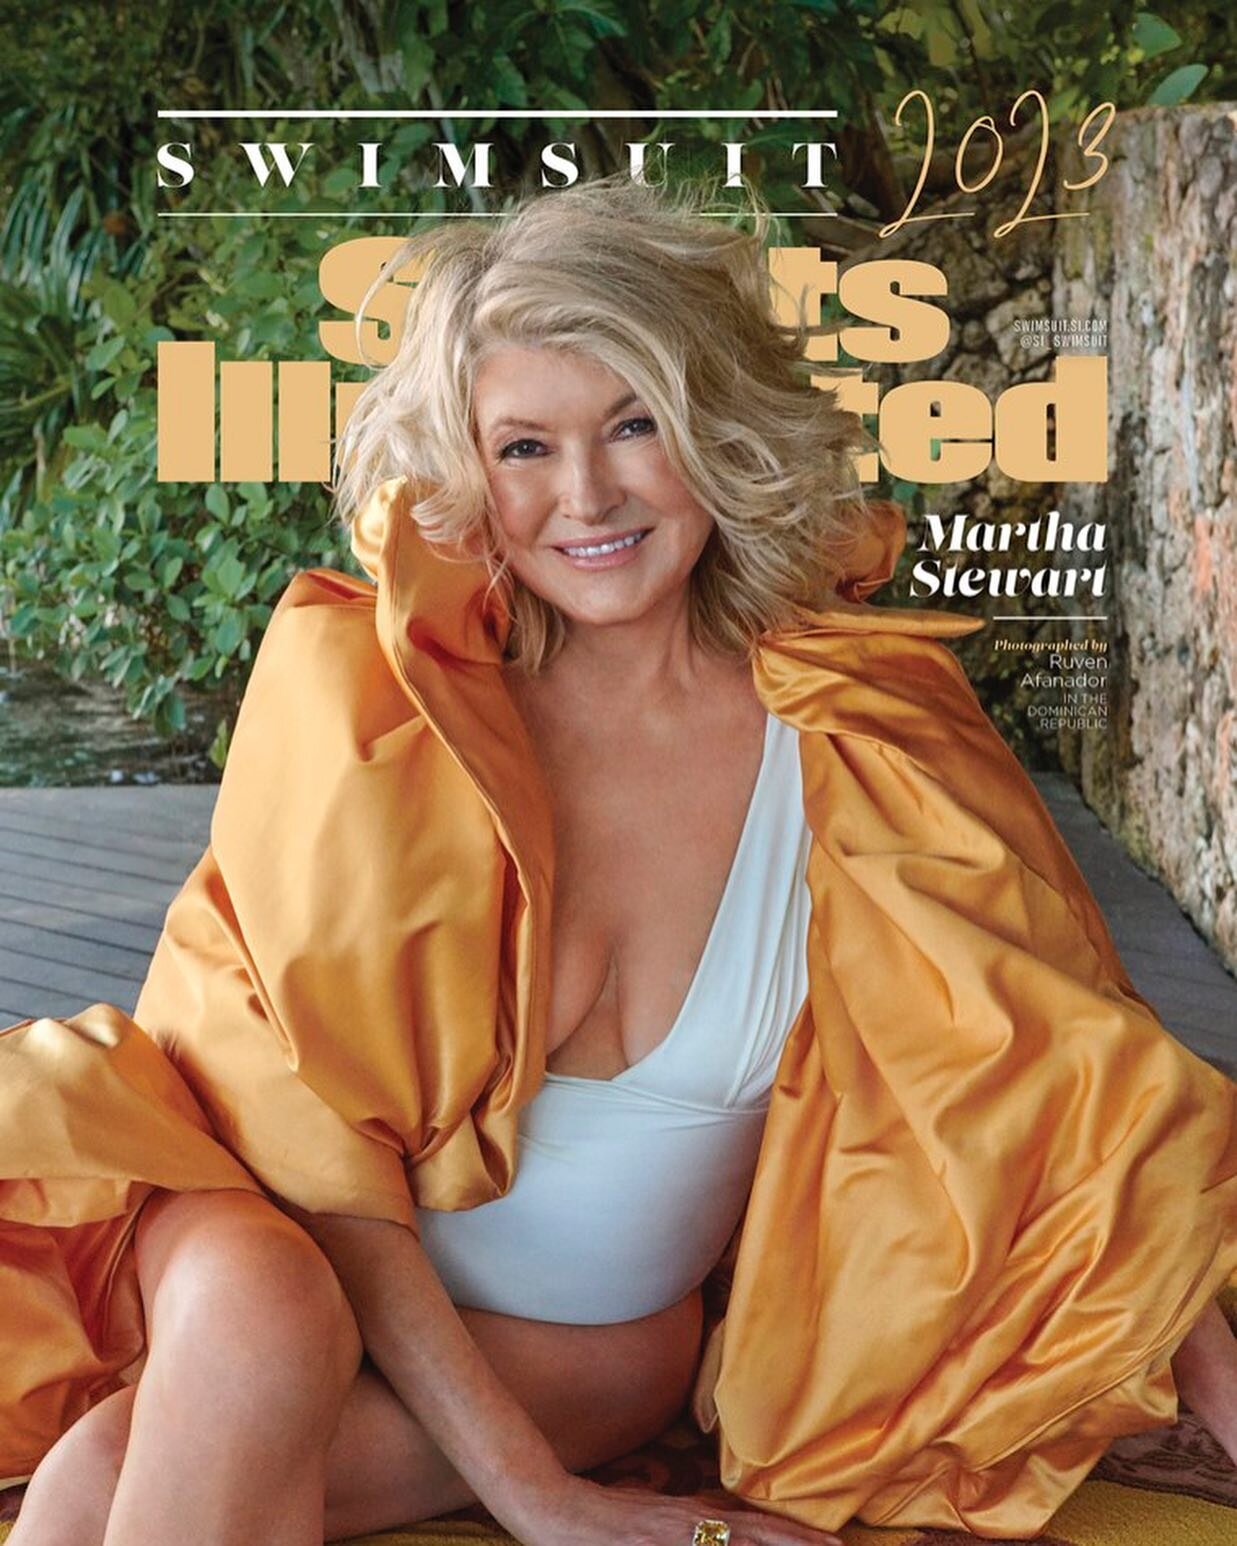 Are we obsessed about this? We are obsessed! 

She is 81 and looks AMAZING!!!!

#womenover50 #marthastewart #sportsillustrated #over50 #over50andfabulous #over50women #swimsuiteditorial #over50beauty #losangeles